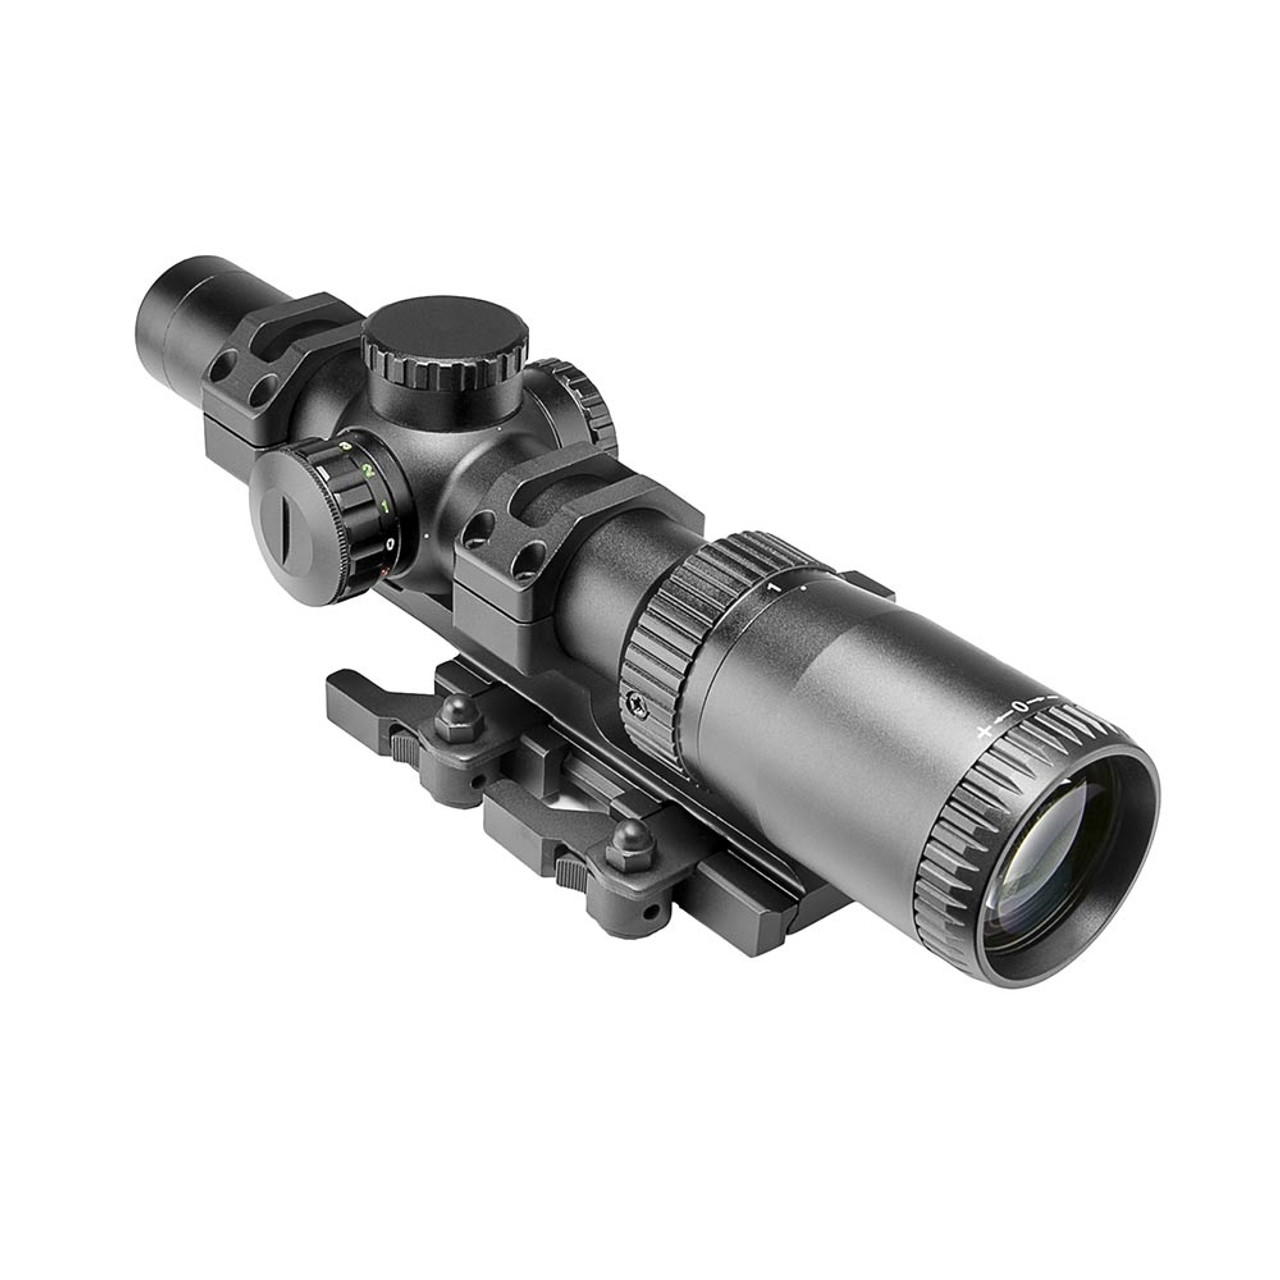 NcSTAR SEEFL1624GSPR-A 30mm 1-6X24 Etched Glass Lpv Reticle Green/Red Ill Spr Qr Mount Scope